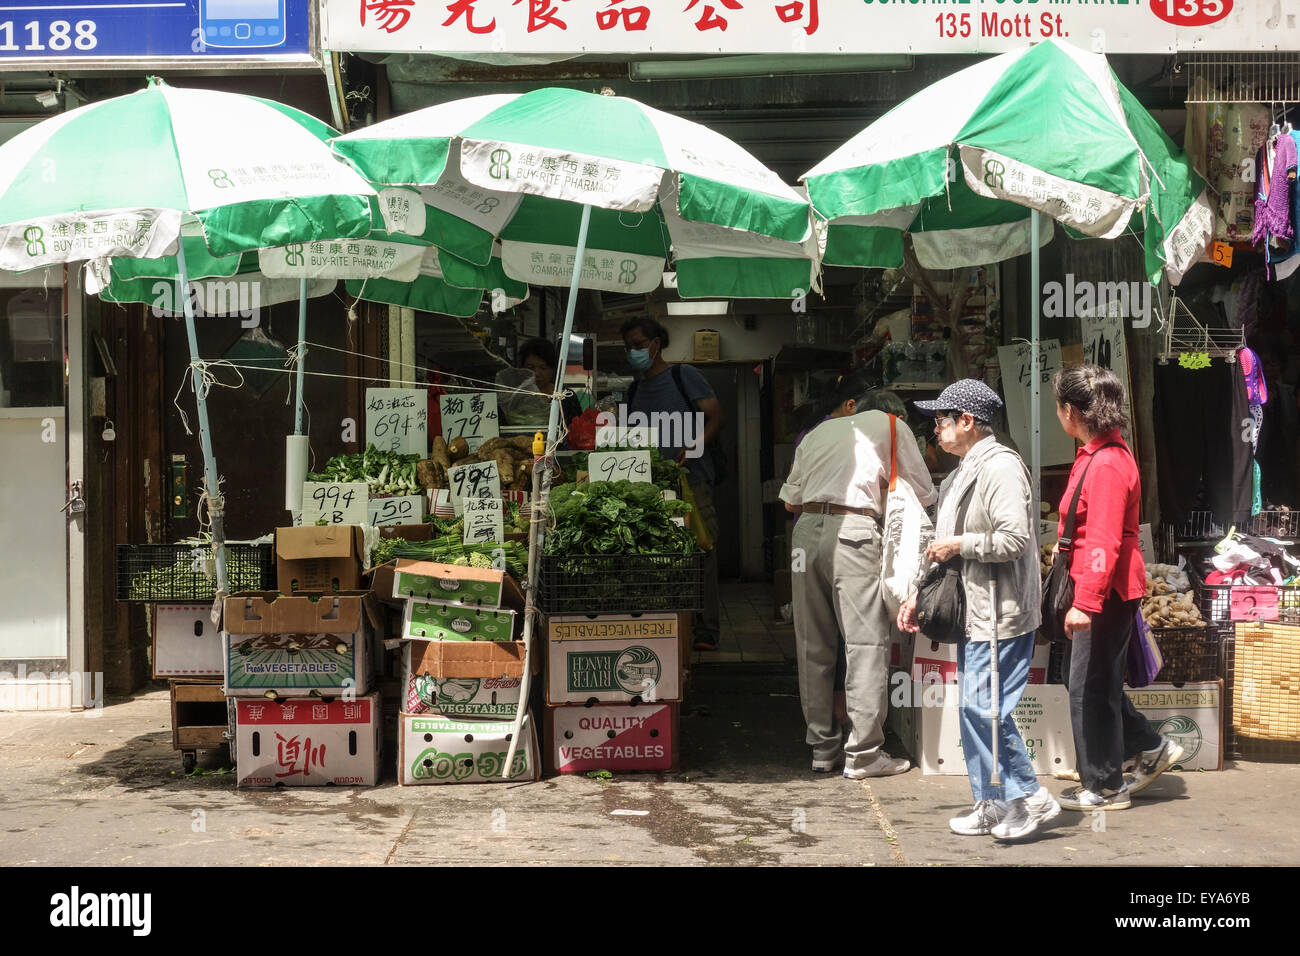 Frontal of Chinese vegetable store in Chinatown, Manhattan, New York City, USA. Stock Photo